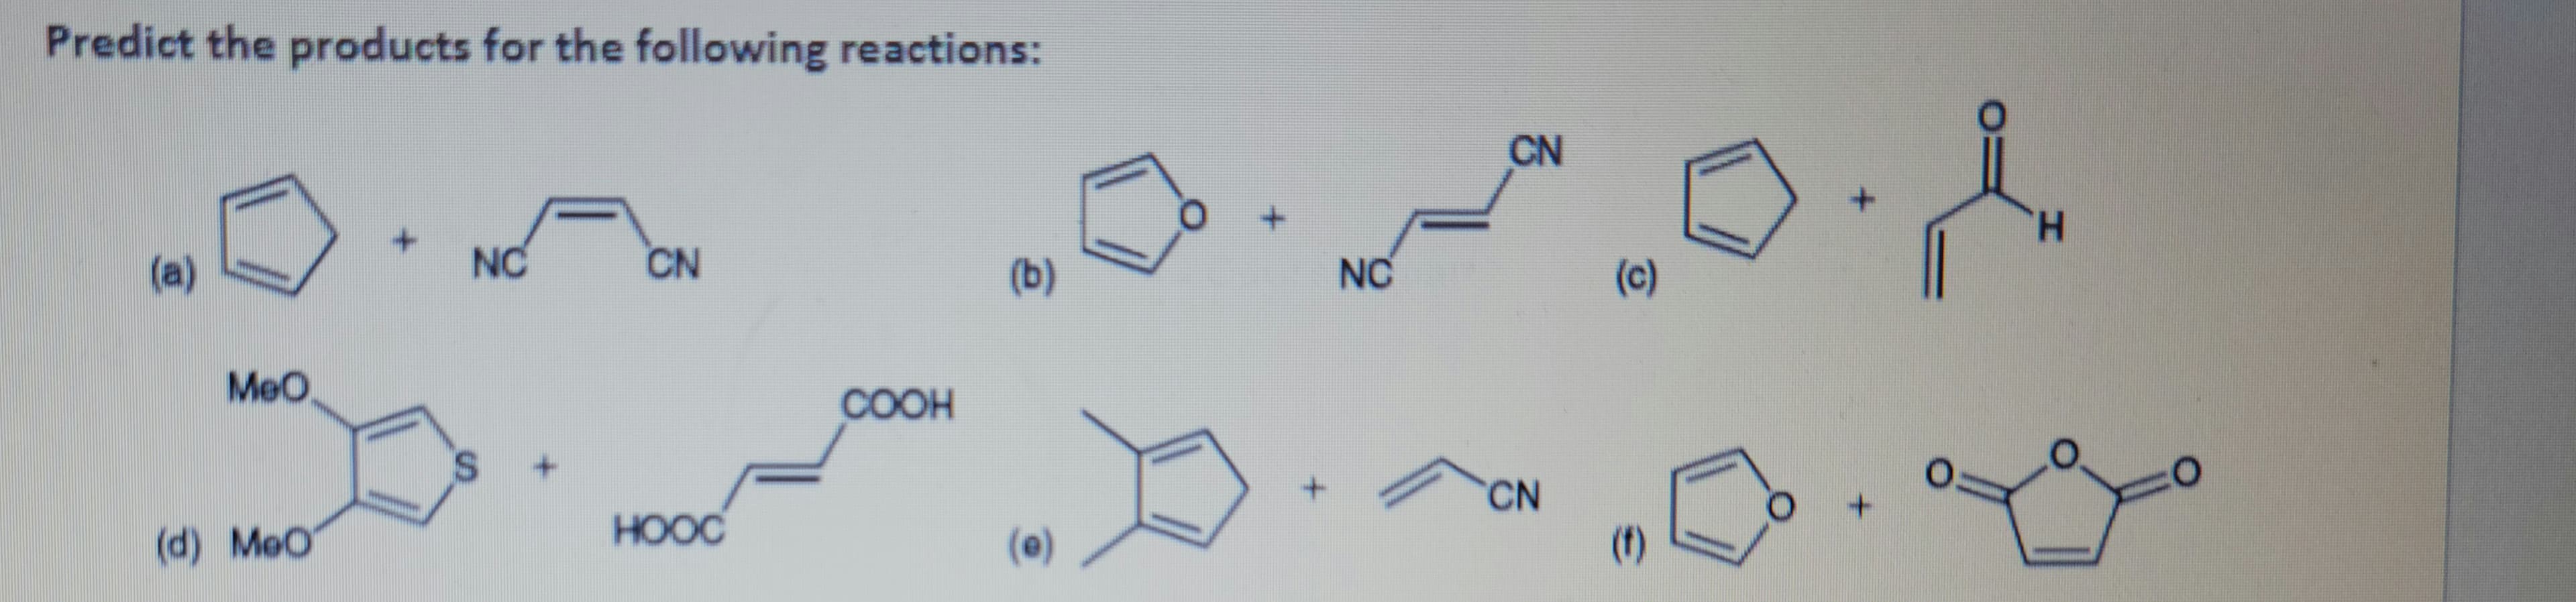 Predict the products for the following reactions:
(a)
MeO
(d) MeO
+
NC
S
+
CN
HOOC
COOH
(b)
(0)
+
+
NC
CN
CN
(c)
(†)
+
+
d
H
O
O